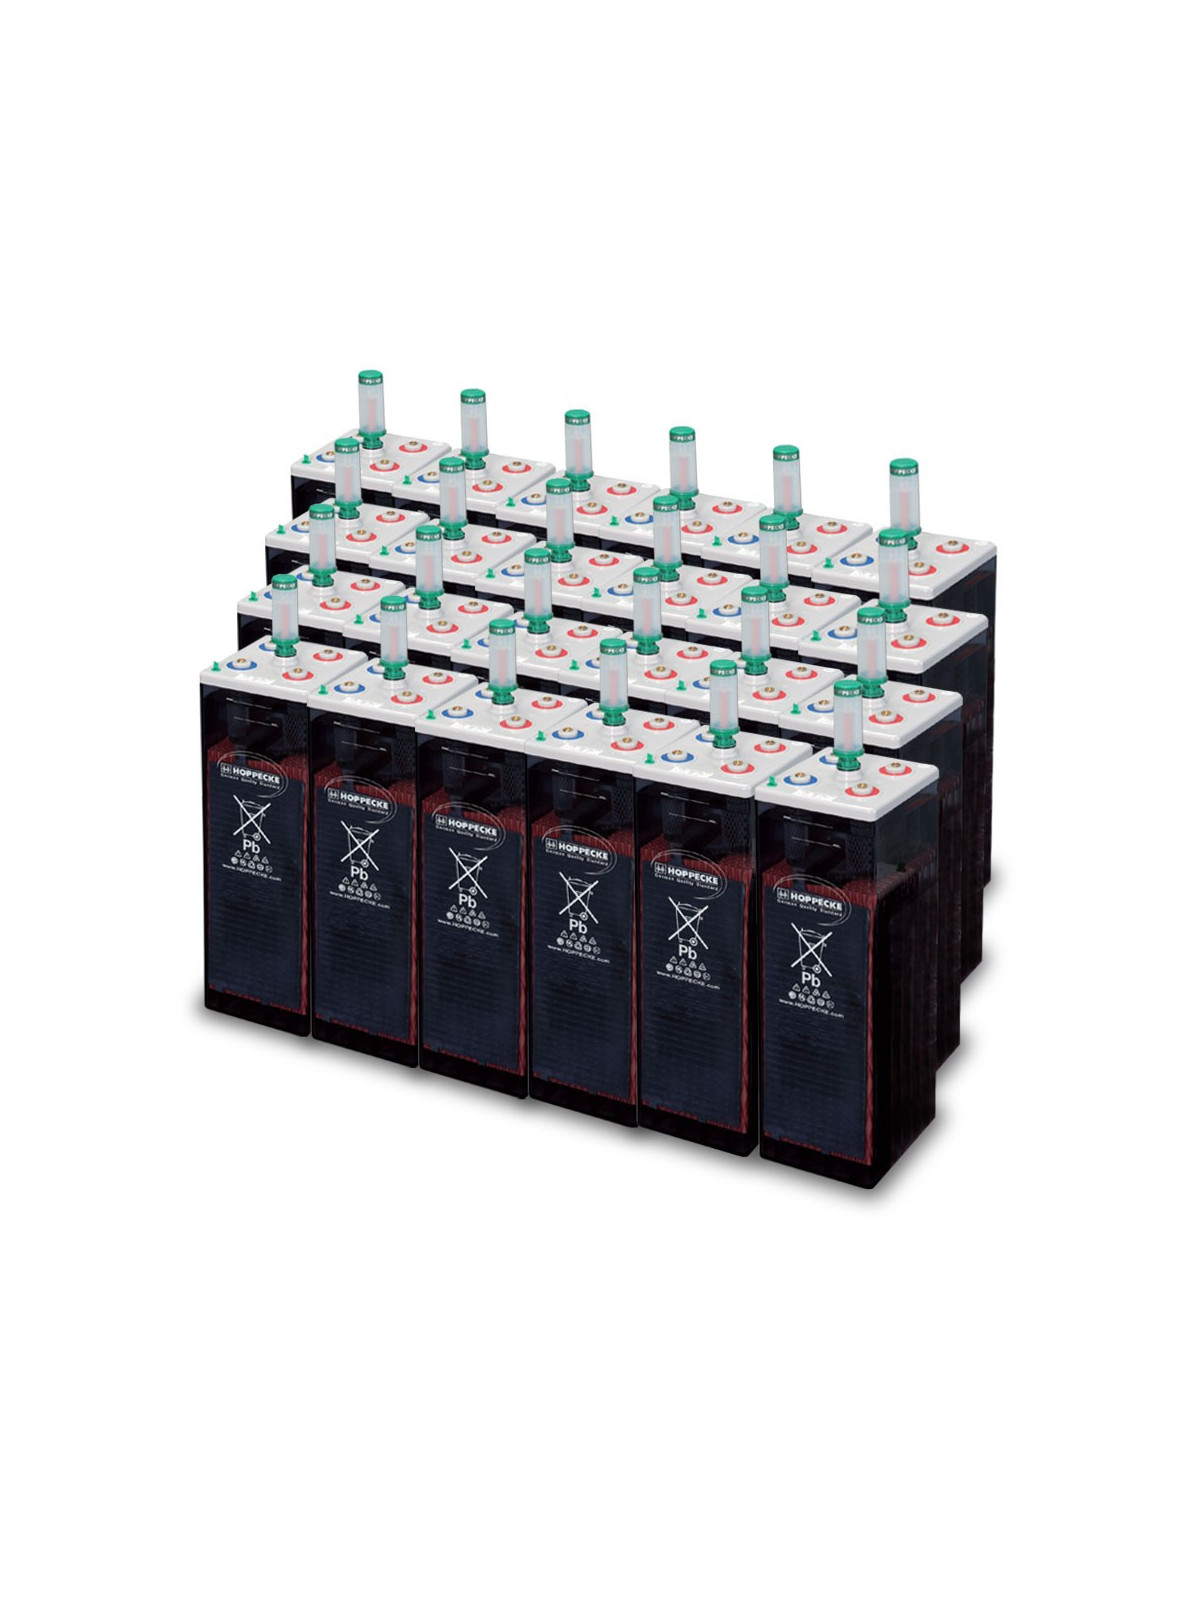 51kWh OPzS 48V battery pack